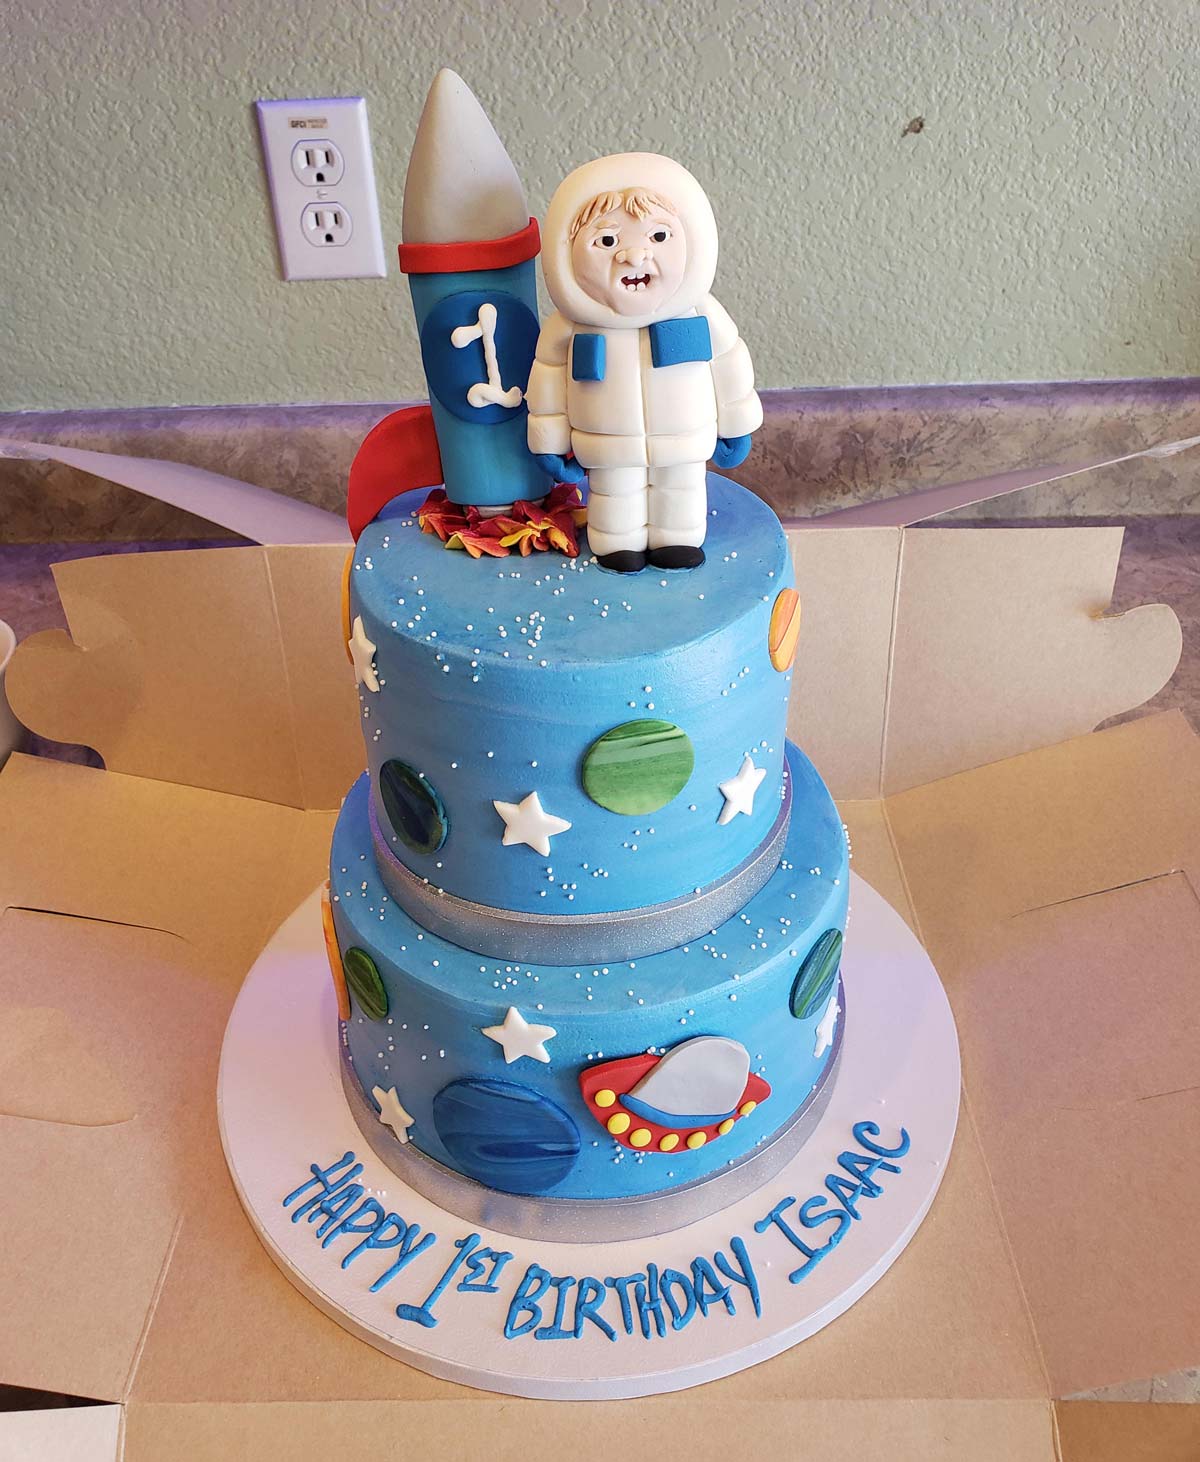 A few people asked for a picture of my son's birthday cake after seeing its horrifying topper. Here it is